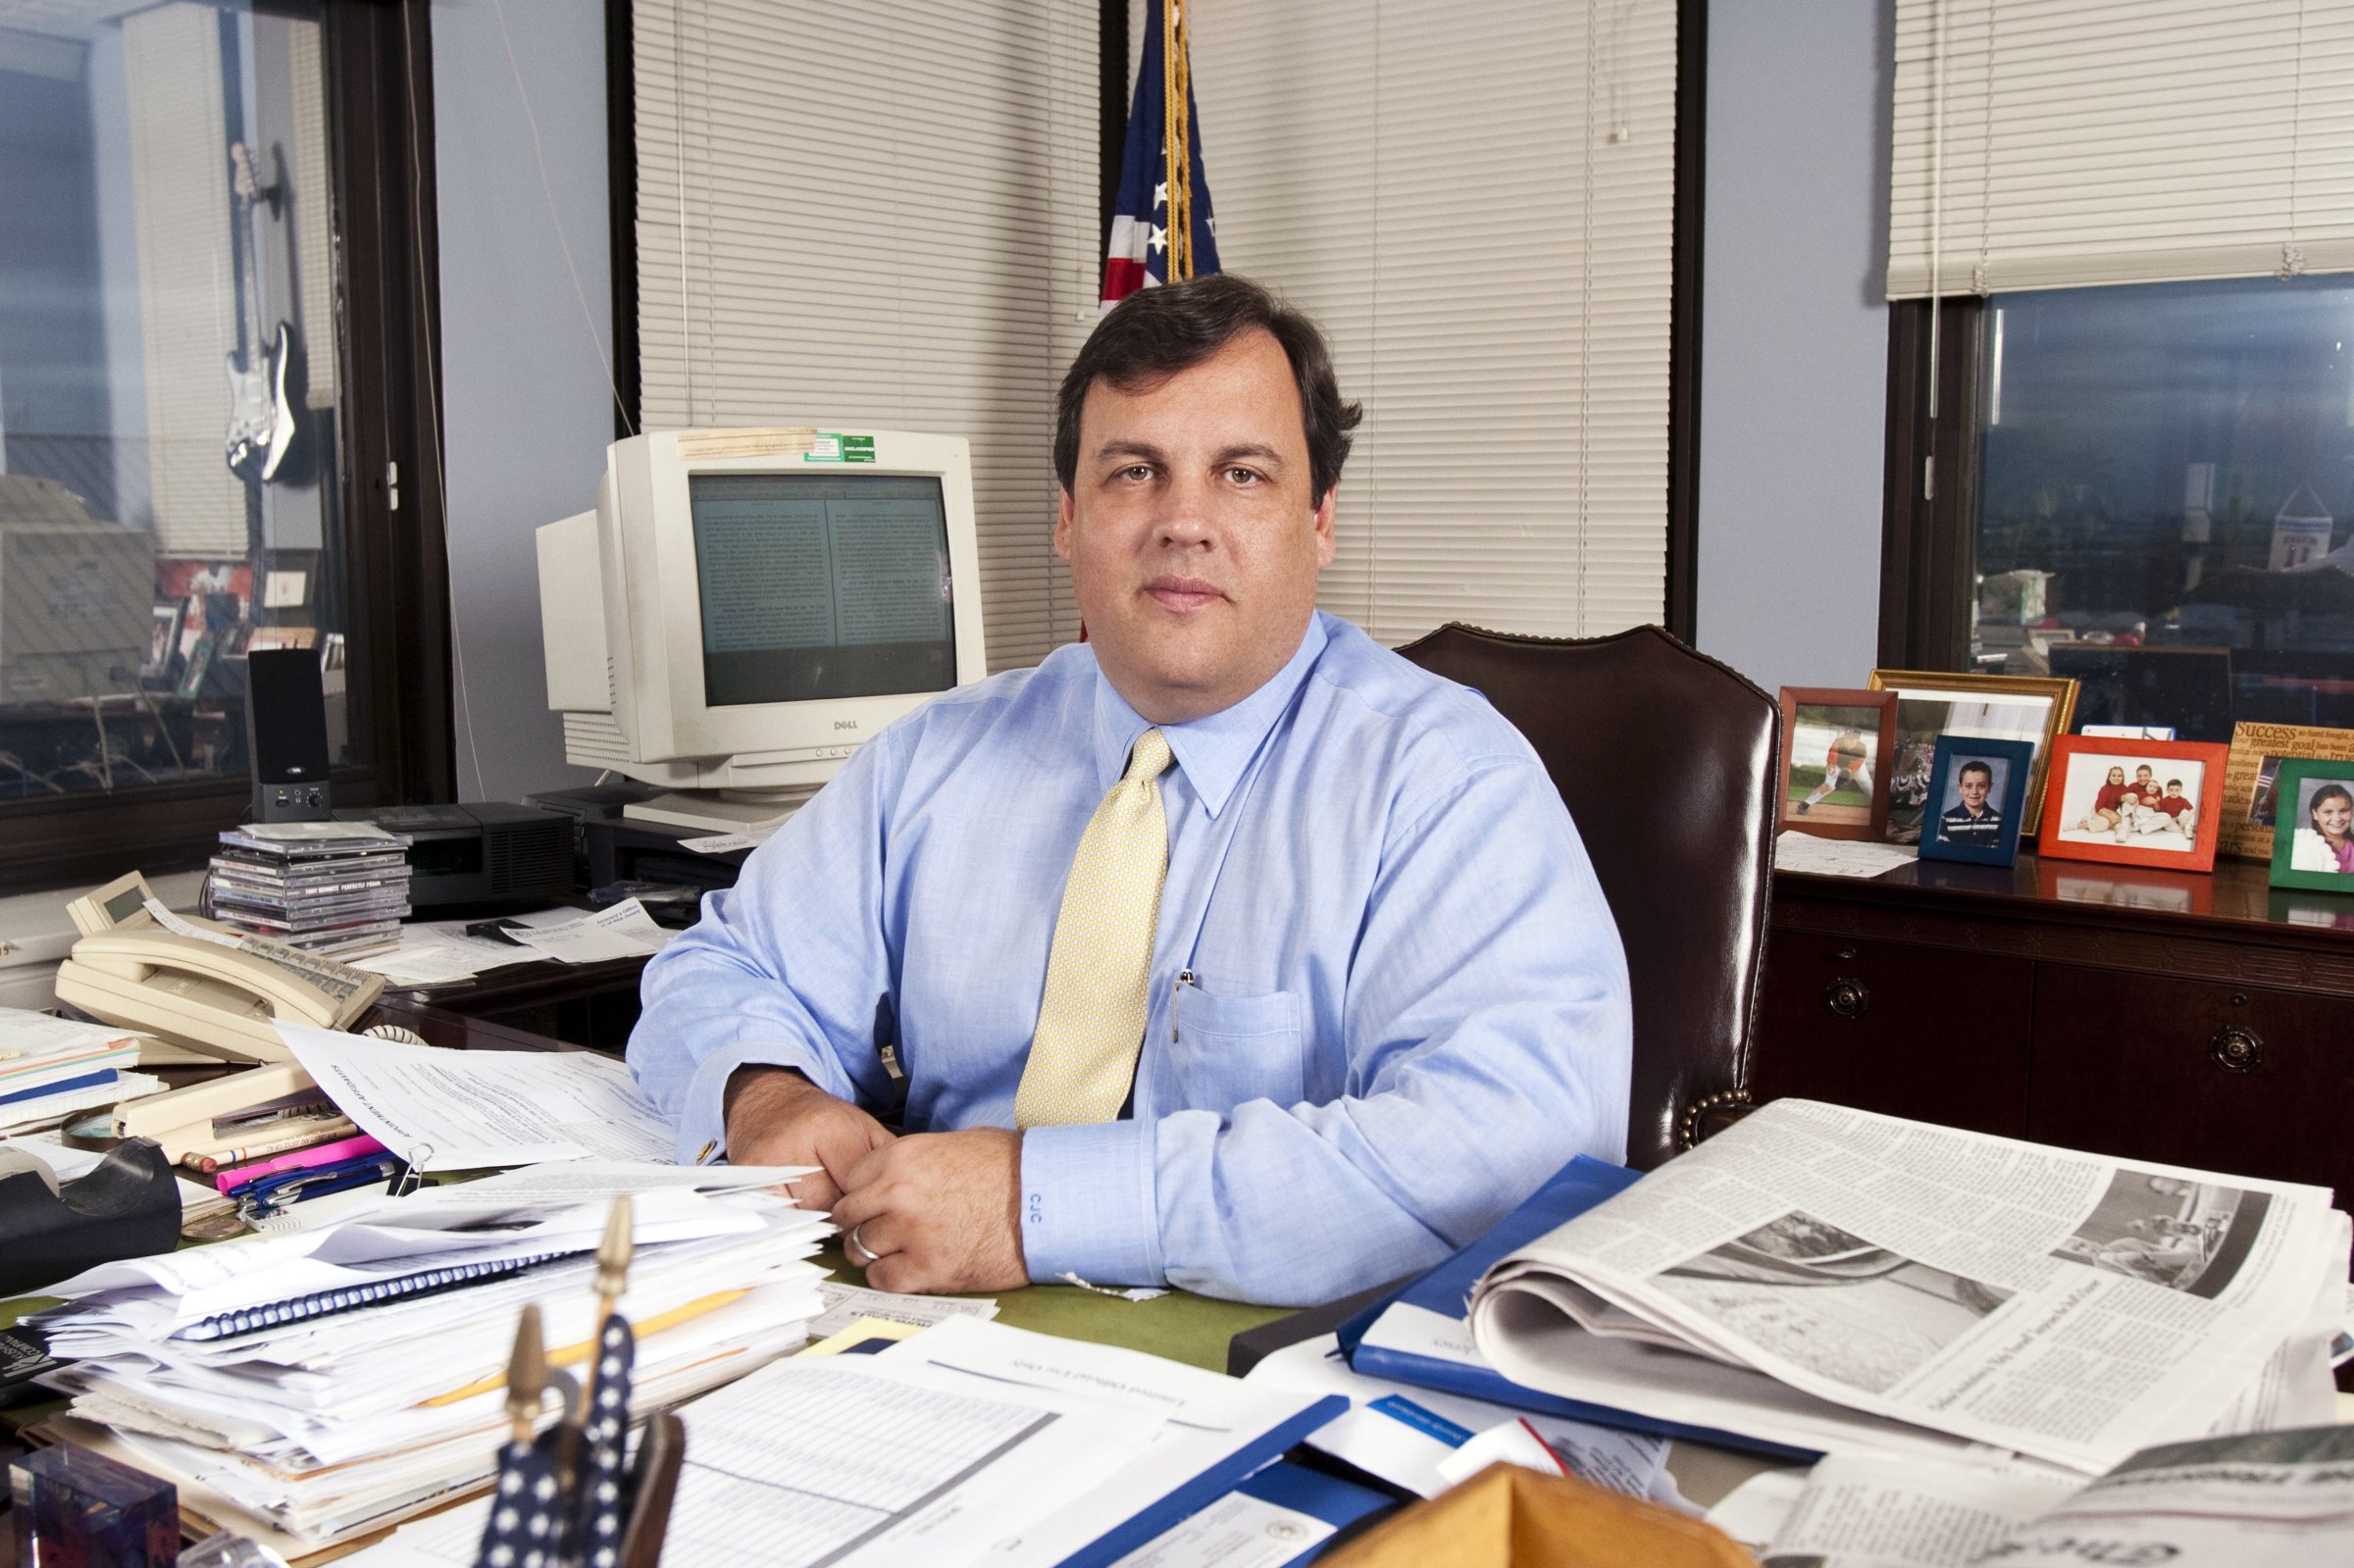 Then-U.S. Attorney Chris Christie, now New Jersey governor poses for a portrait in Trenton, N.J. on April 17, 2007.